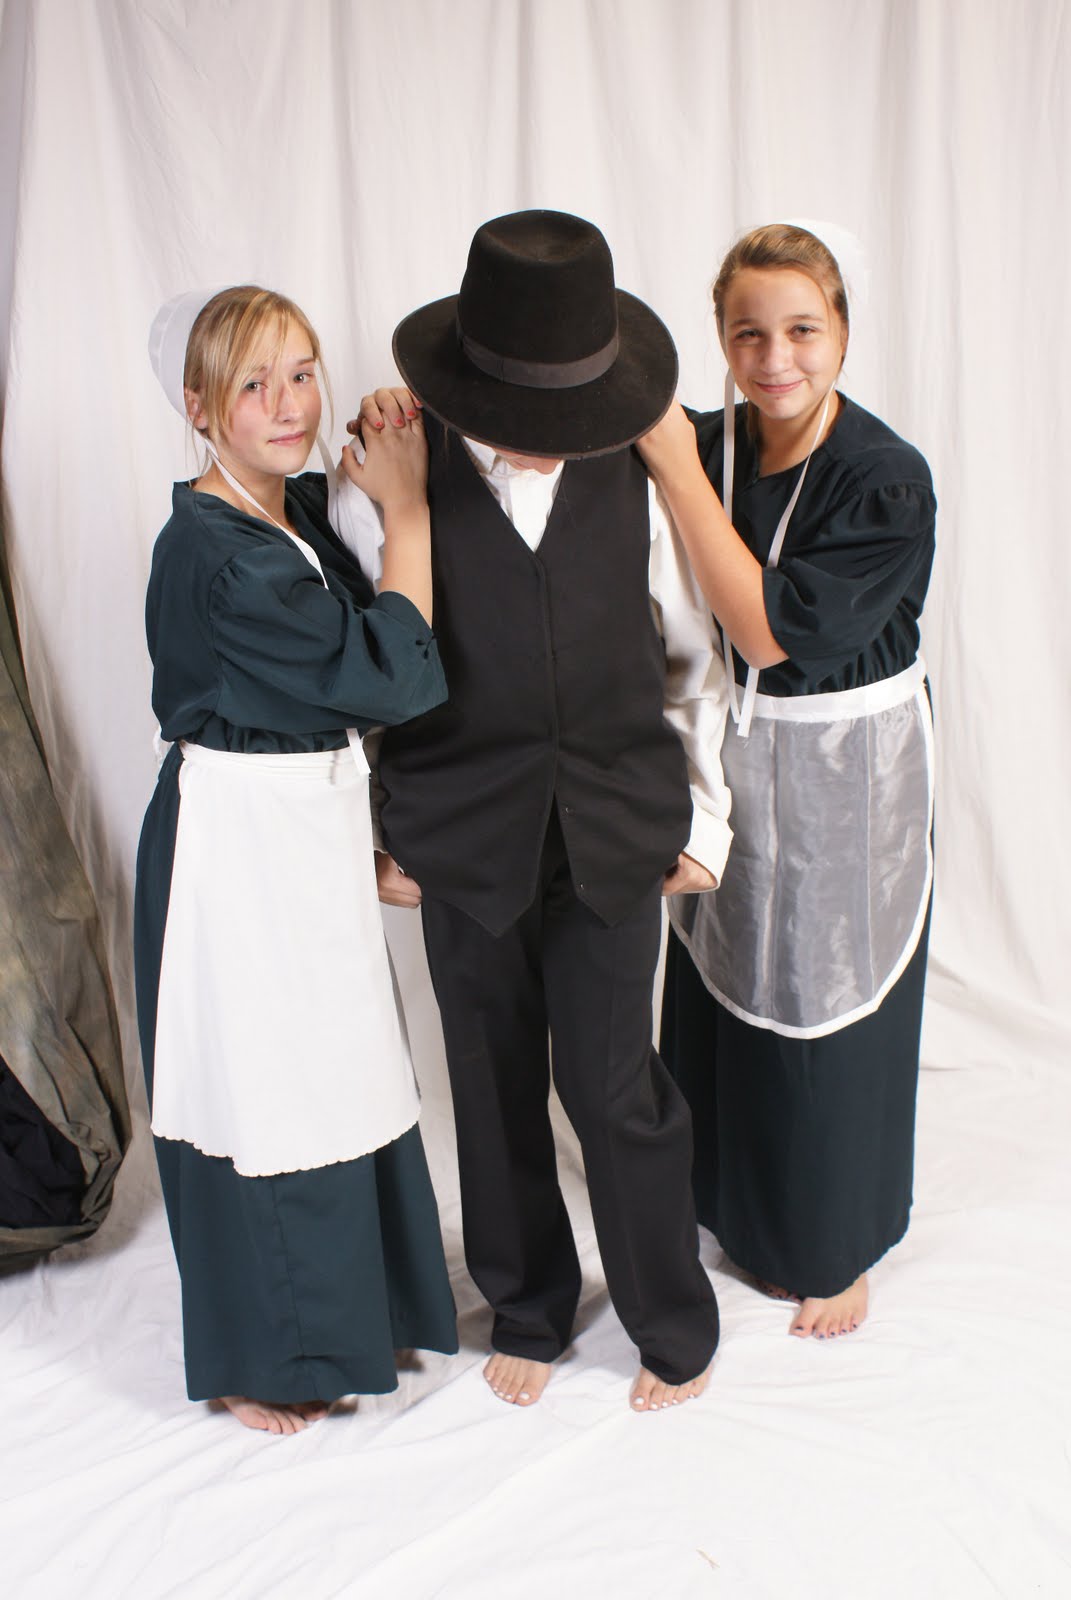 All things Amish: Buy Amish Man's Clothes Here